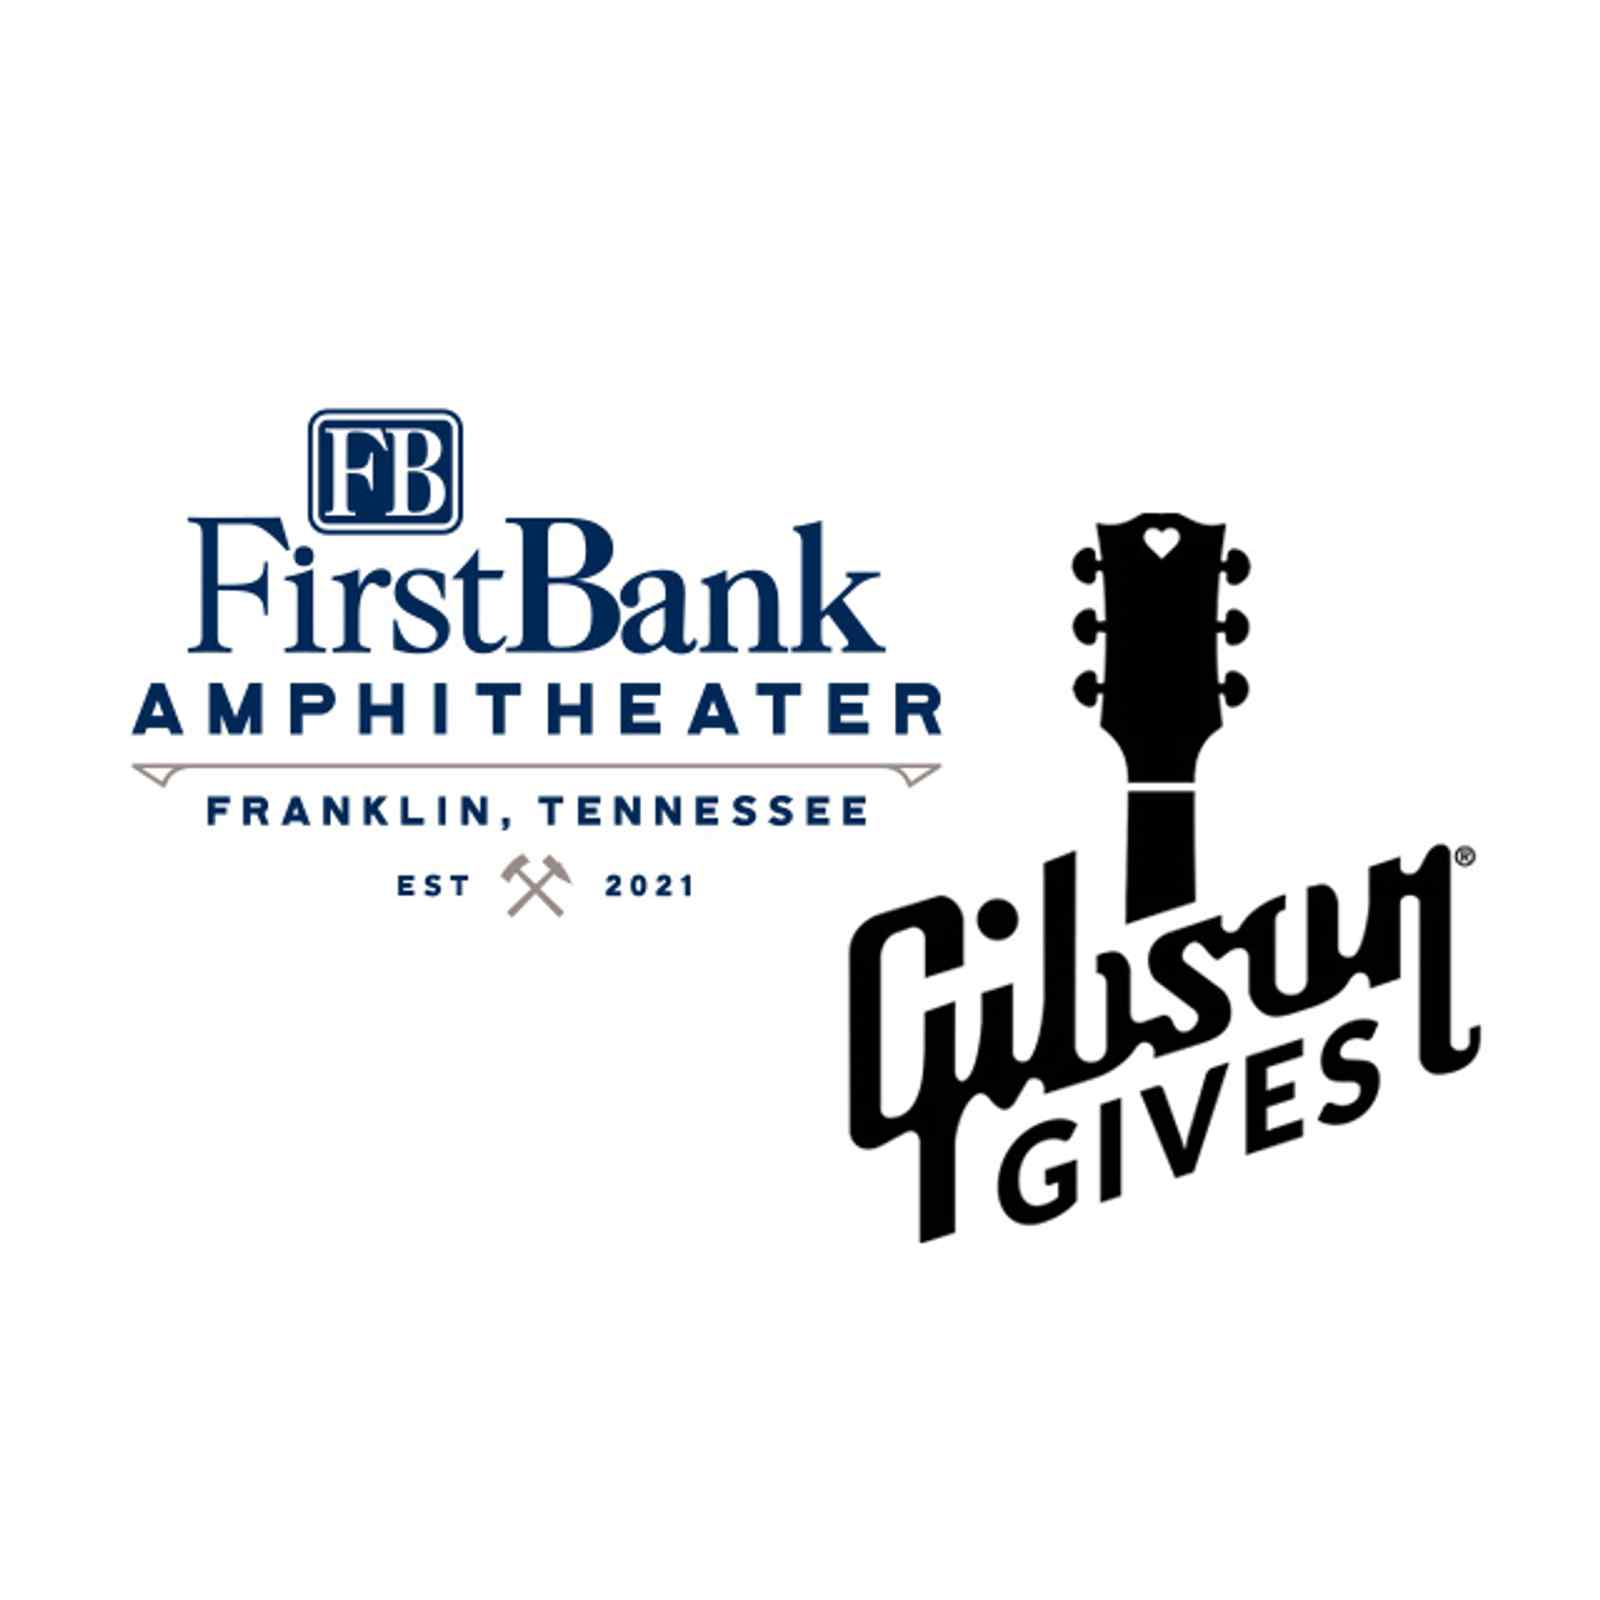 FirstBank Amphitheater and Gibson Gives Raise Over $47,000 for Students and Music Education in Williamson County